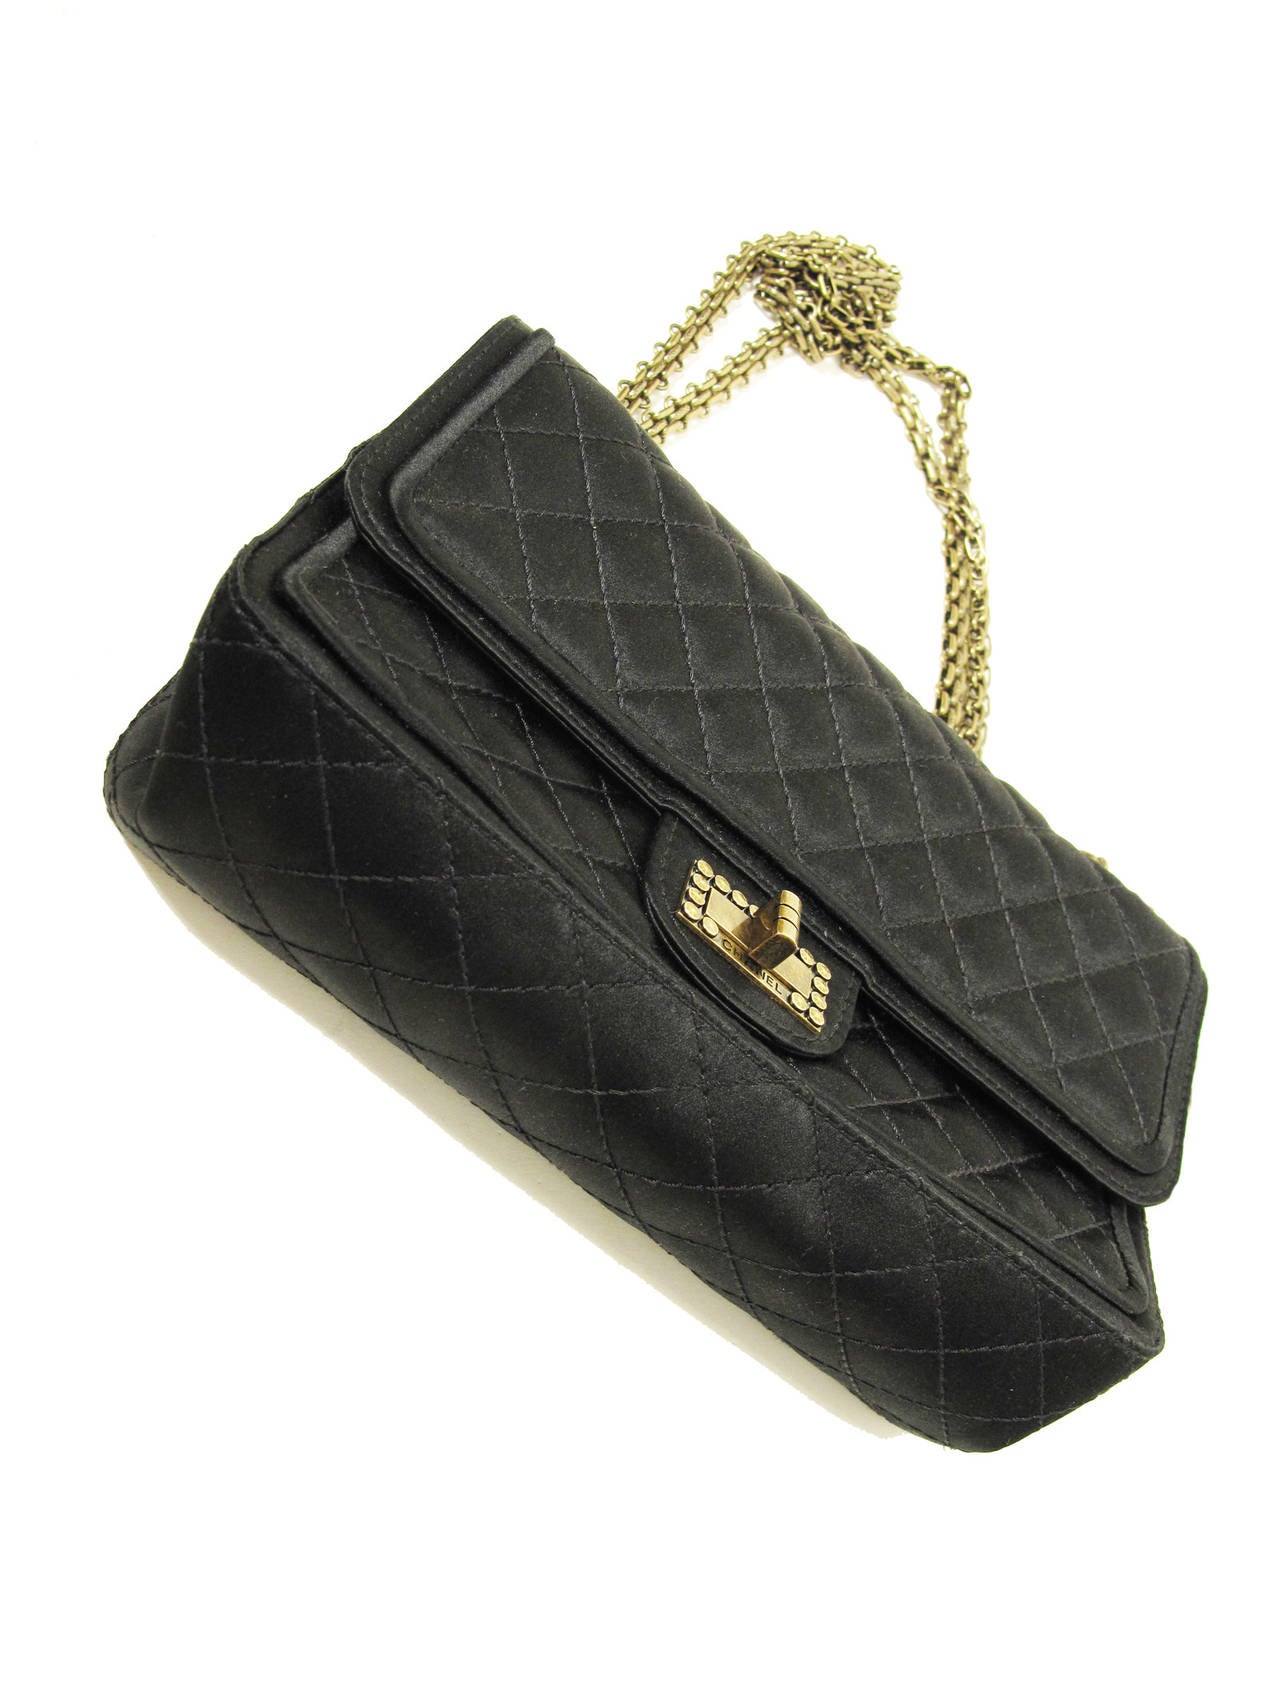 CHANEL Black Quilted Satin 2.55 Double Flap Bag circa 2009 / 2010
Heavy Chain, double flap. Perfect bag for day and night. Excellent vintage condition. 
Approximate measurements : 9 1/2